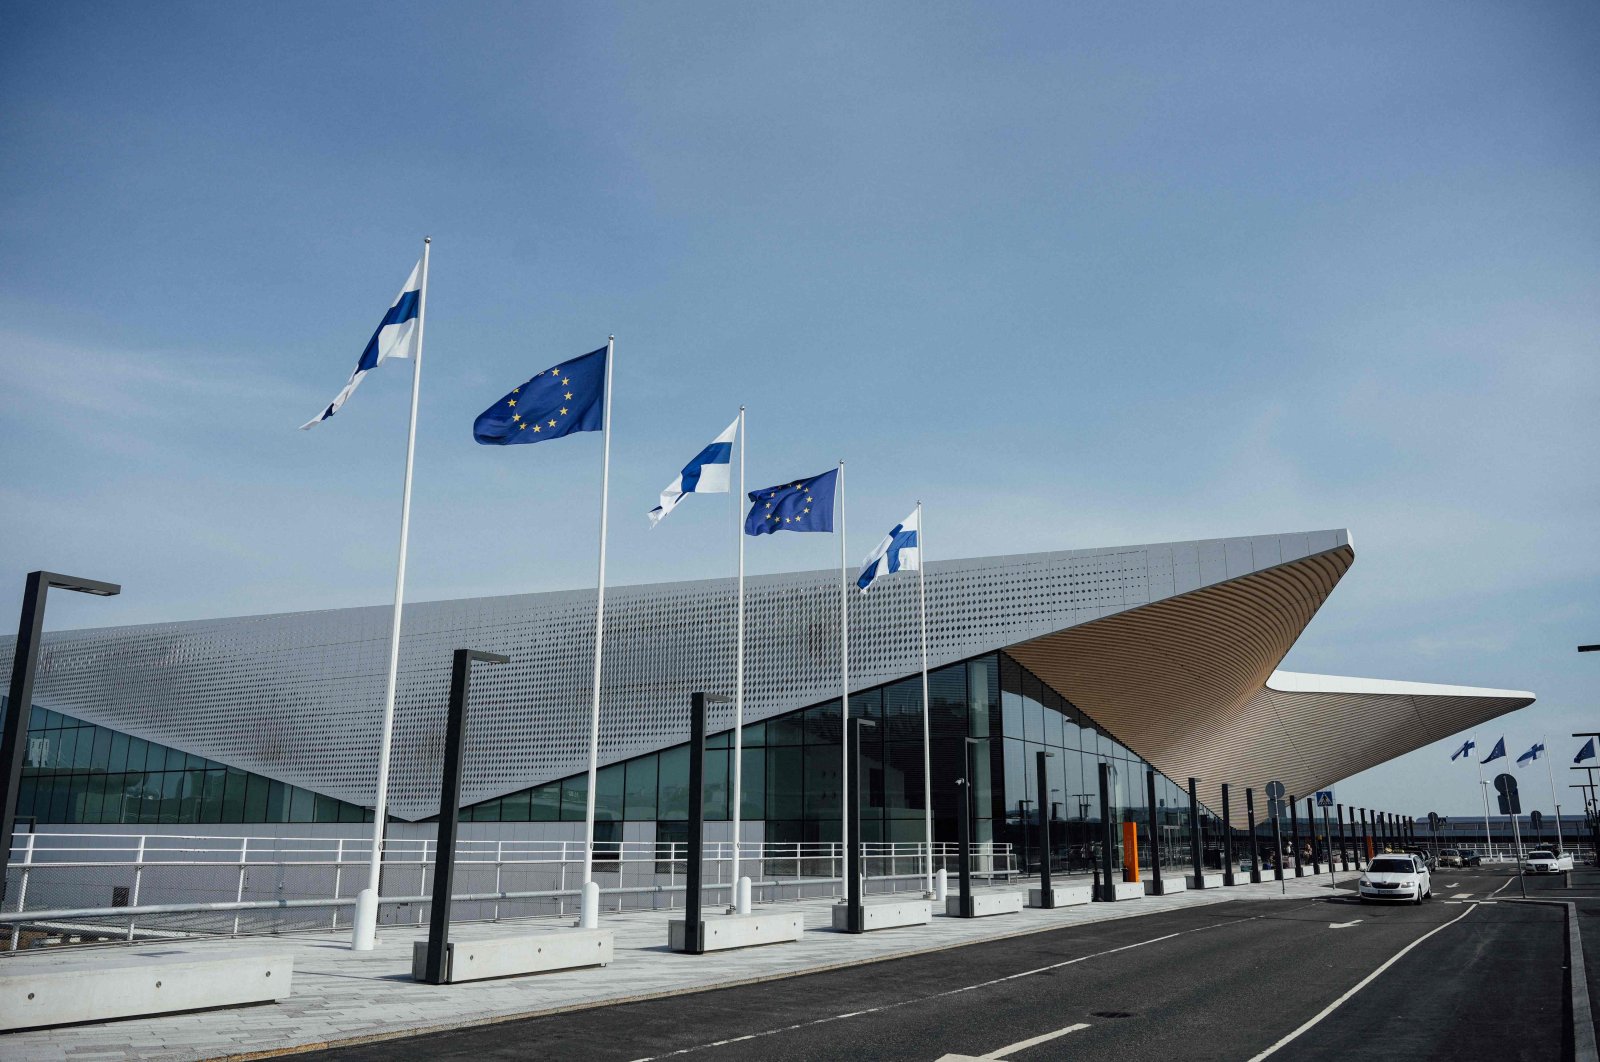 Finnish and EU flags wave outside of the Terminal 2 of the Helsinki airport, Vantaa, Finland, Aug. 19, 2022. (AFP Photo)